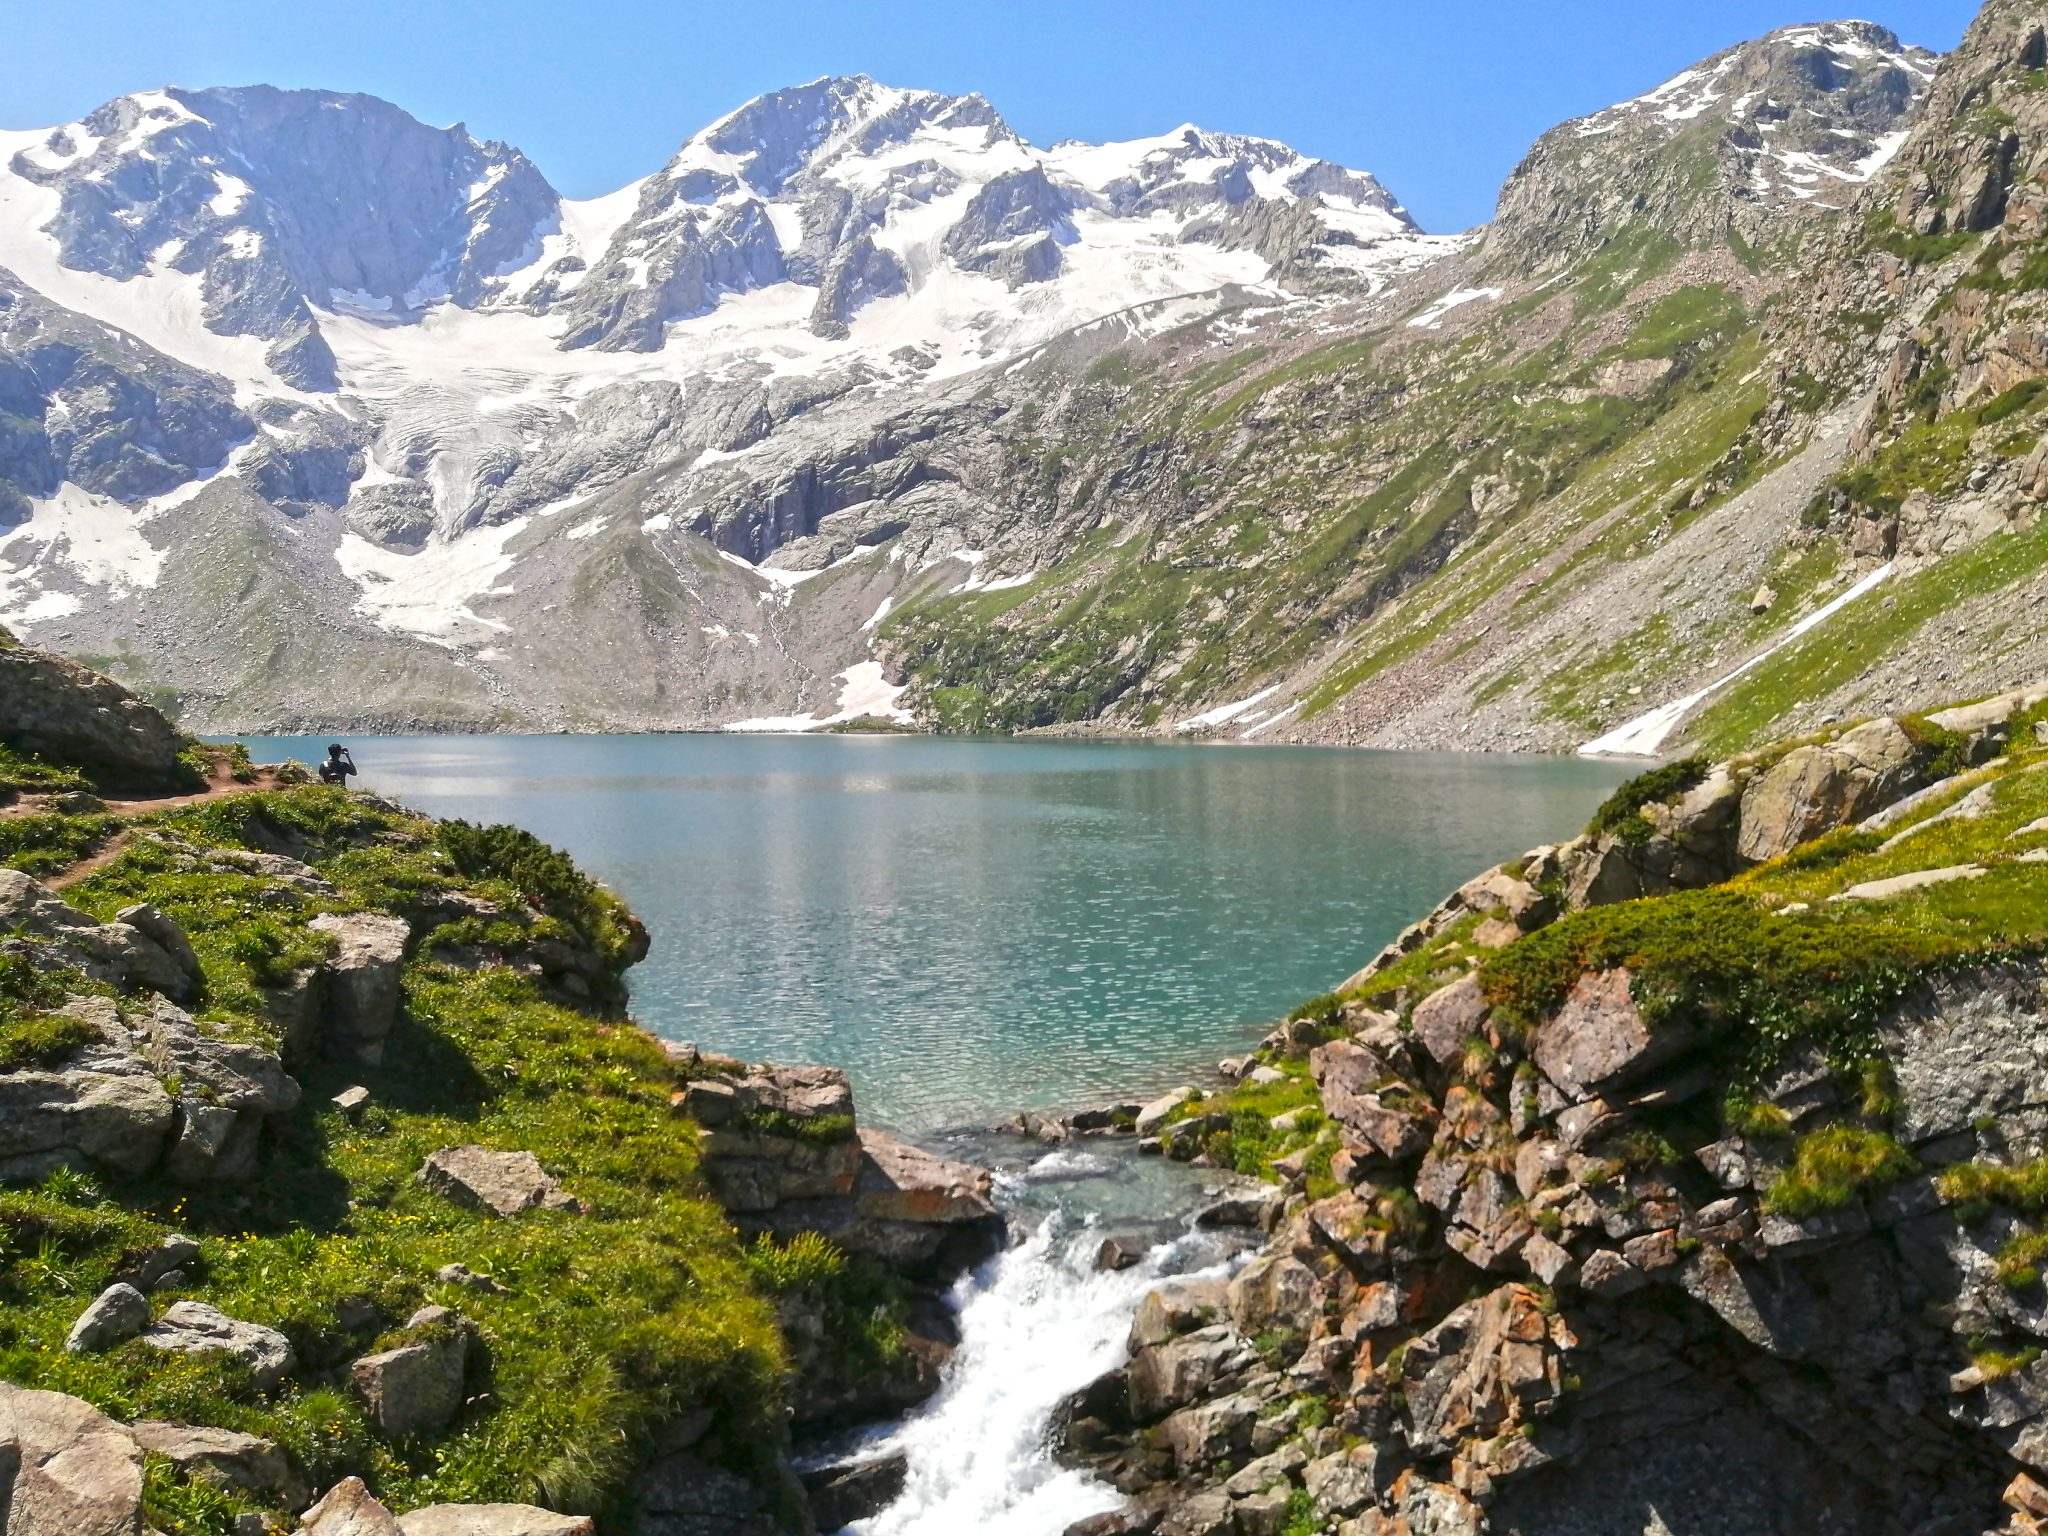 The lake is fed by the surrounding melting glacier waters. The word Katora means "bowl" in Pashto.